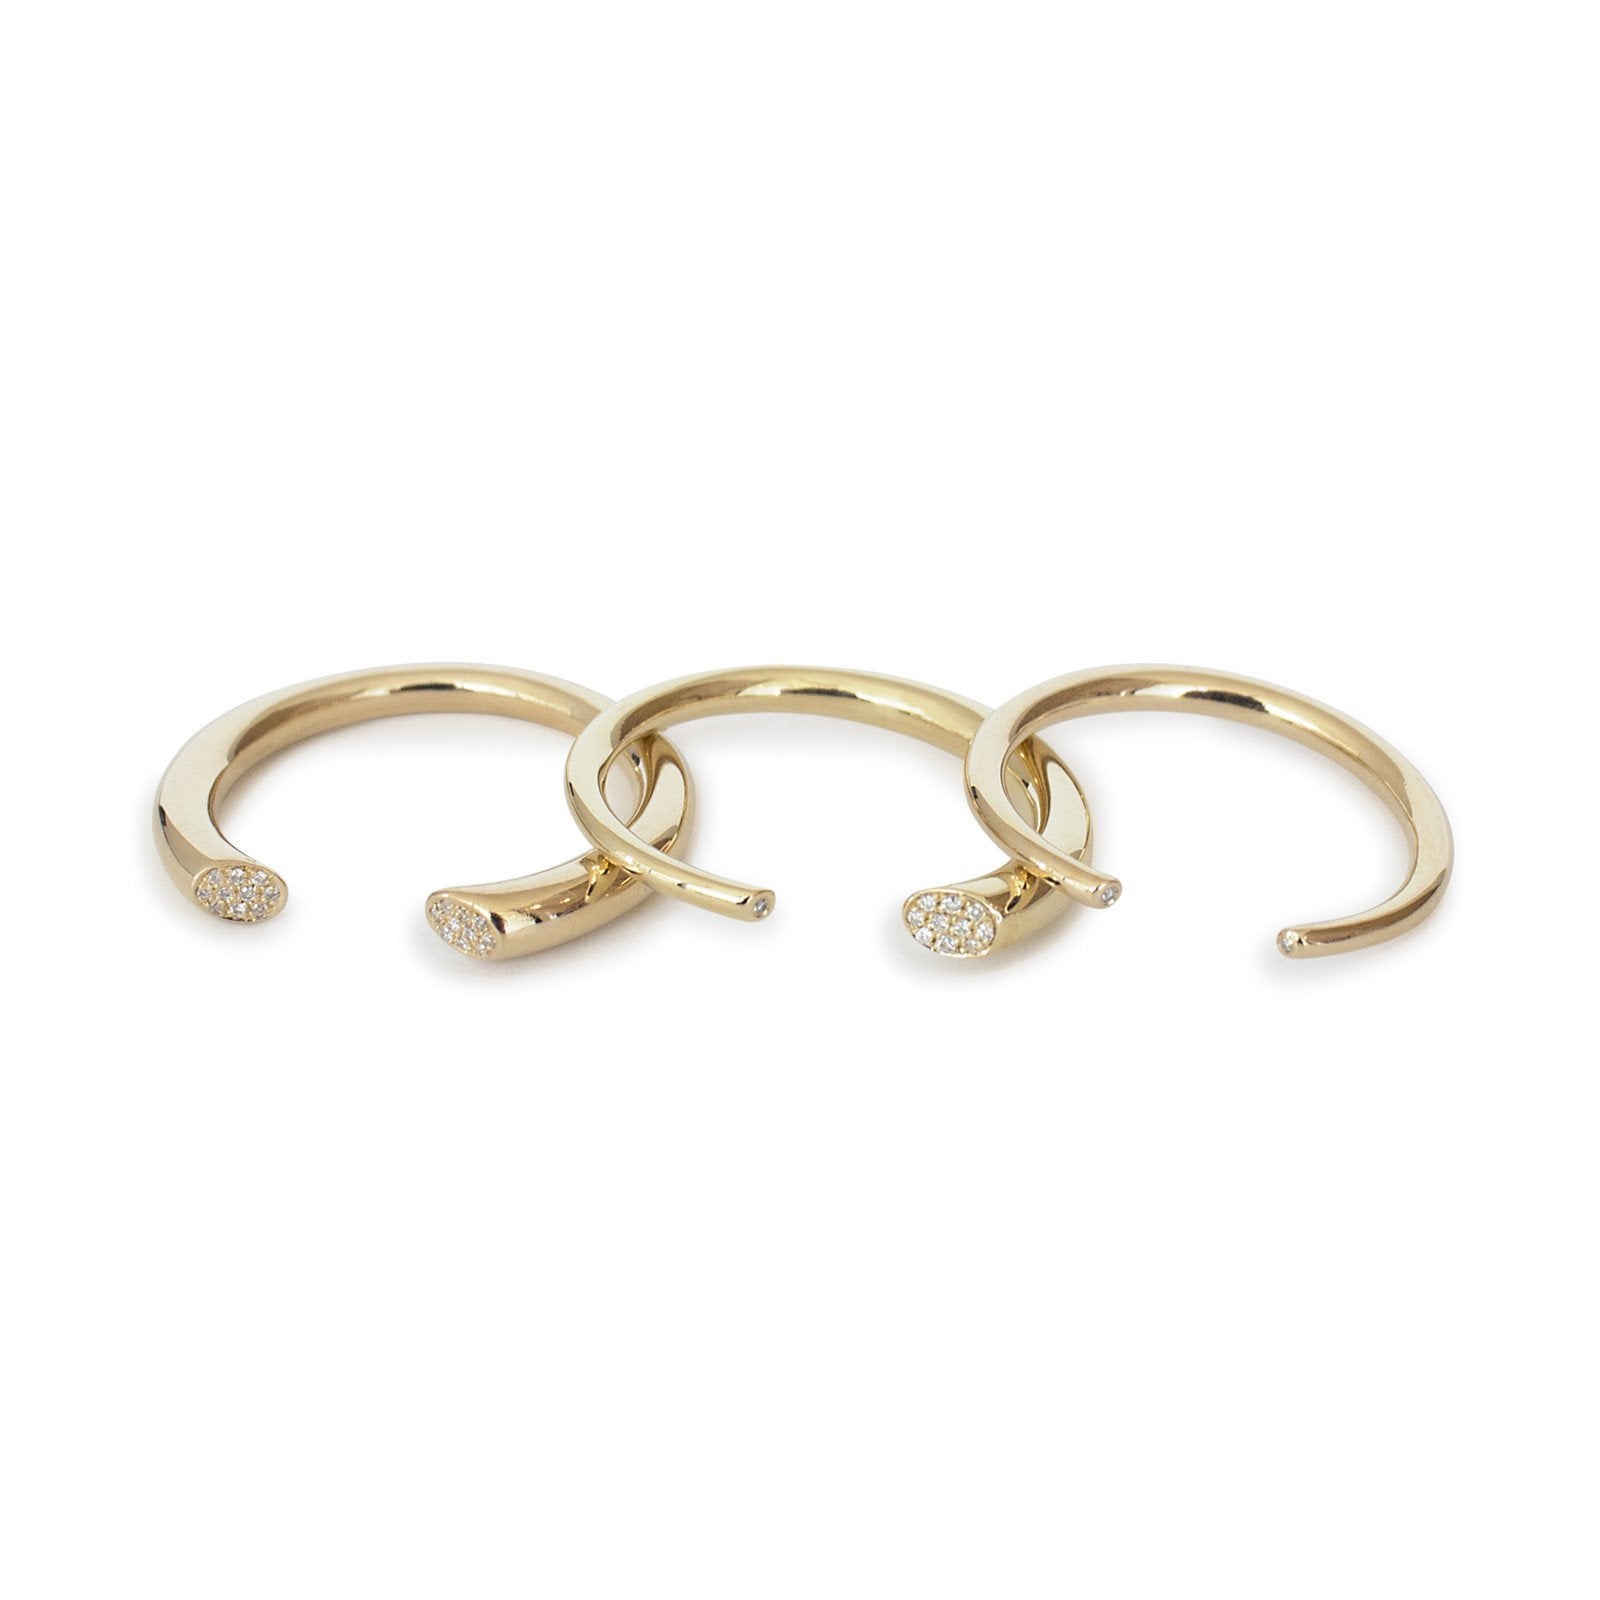  arpent stacking rings with diamonds